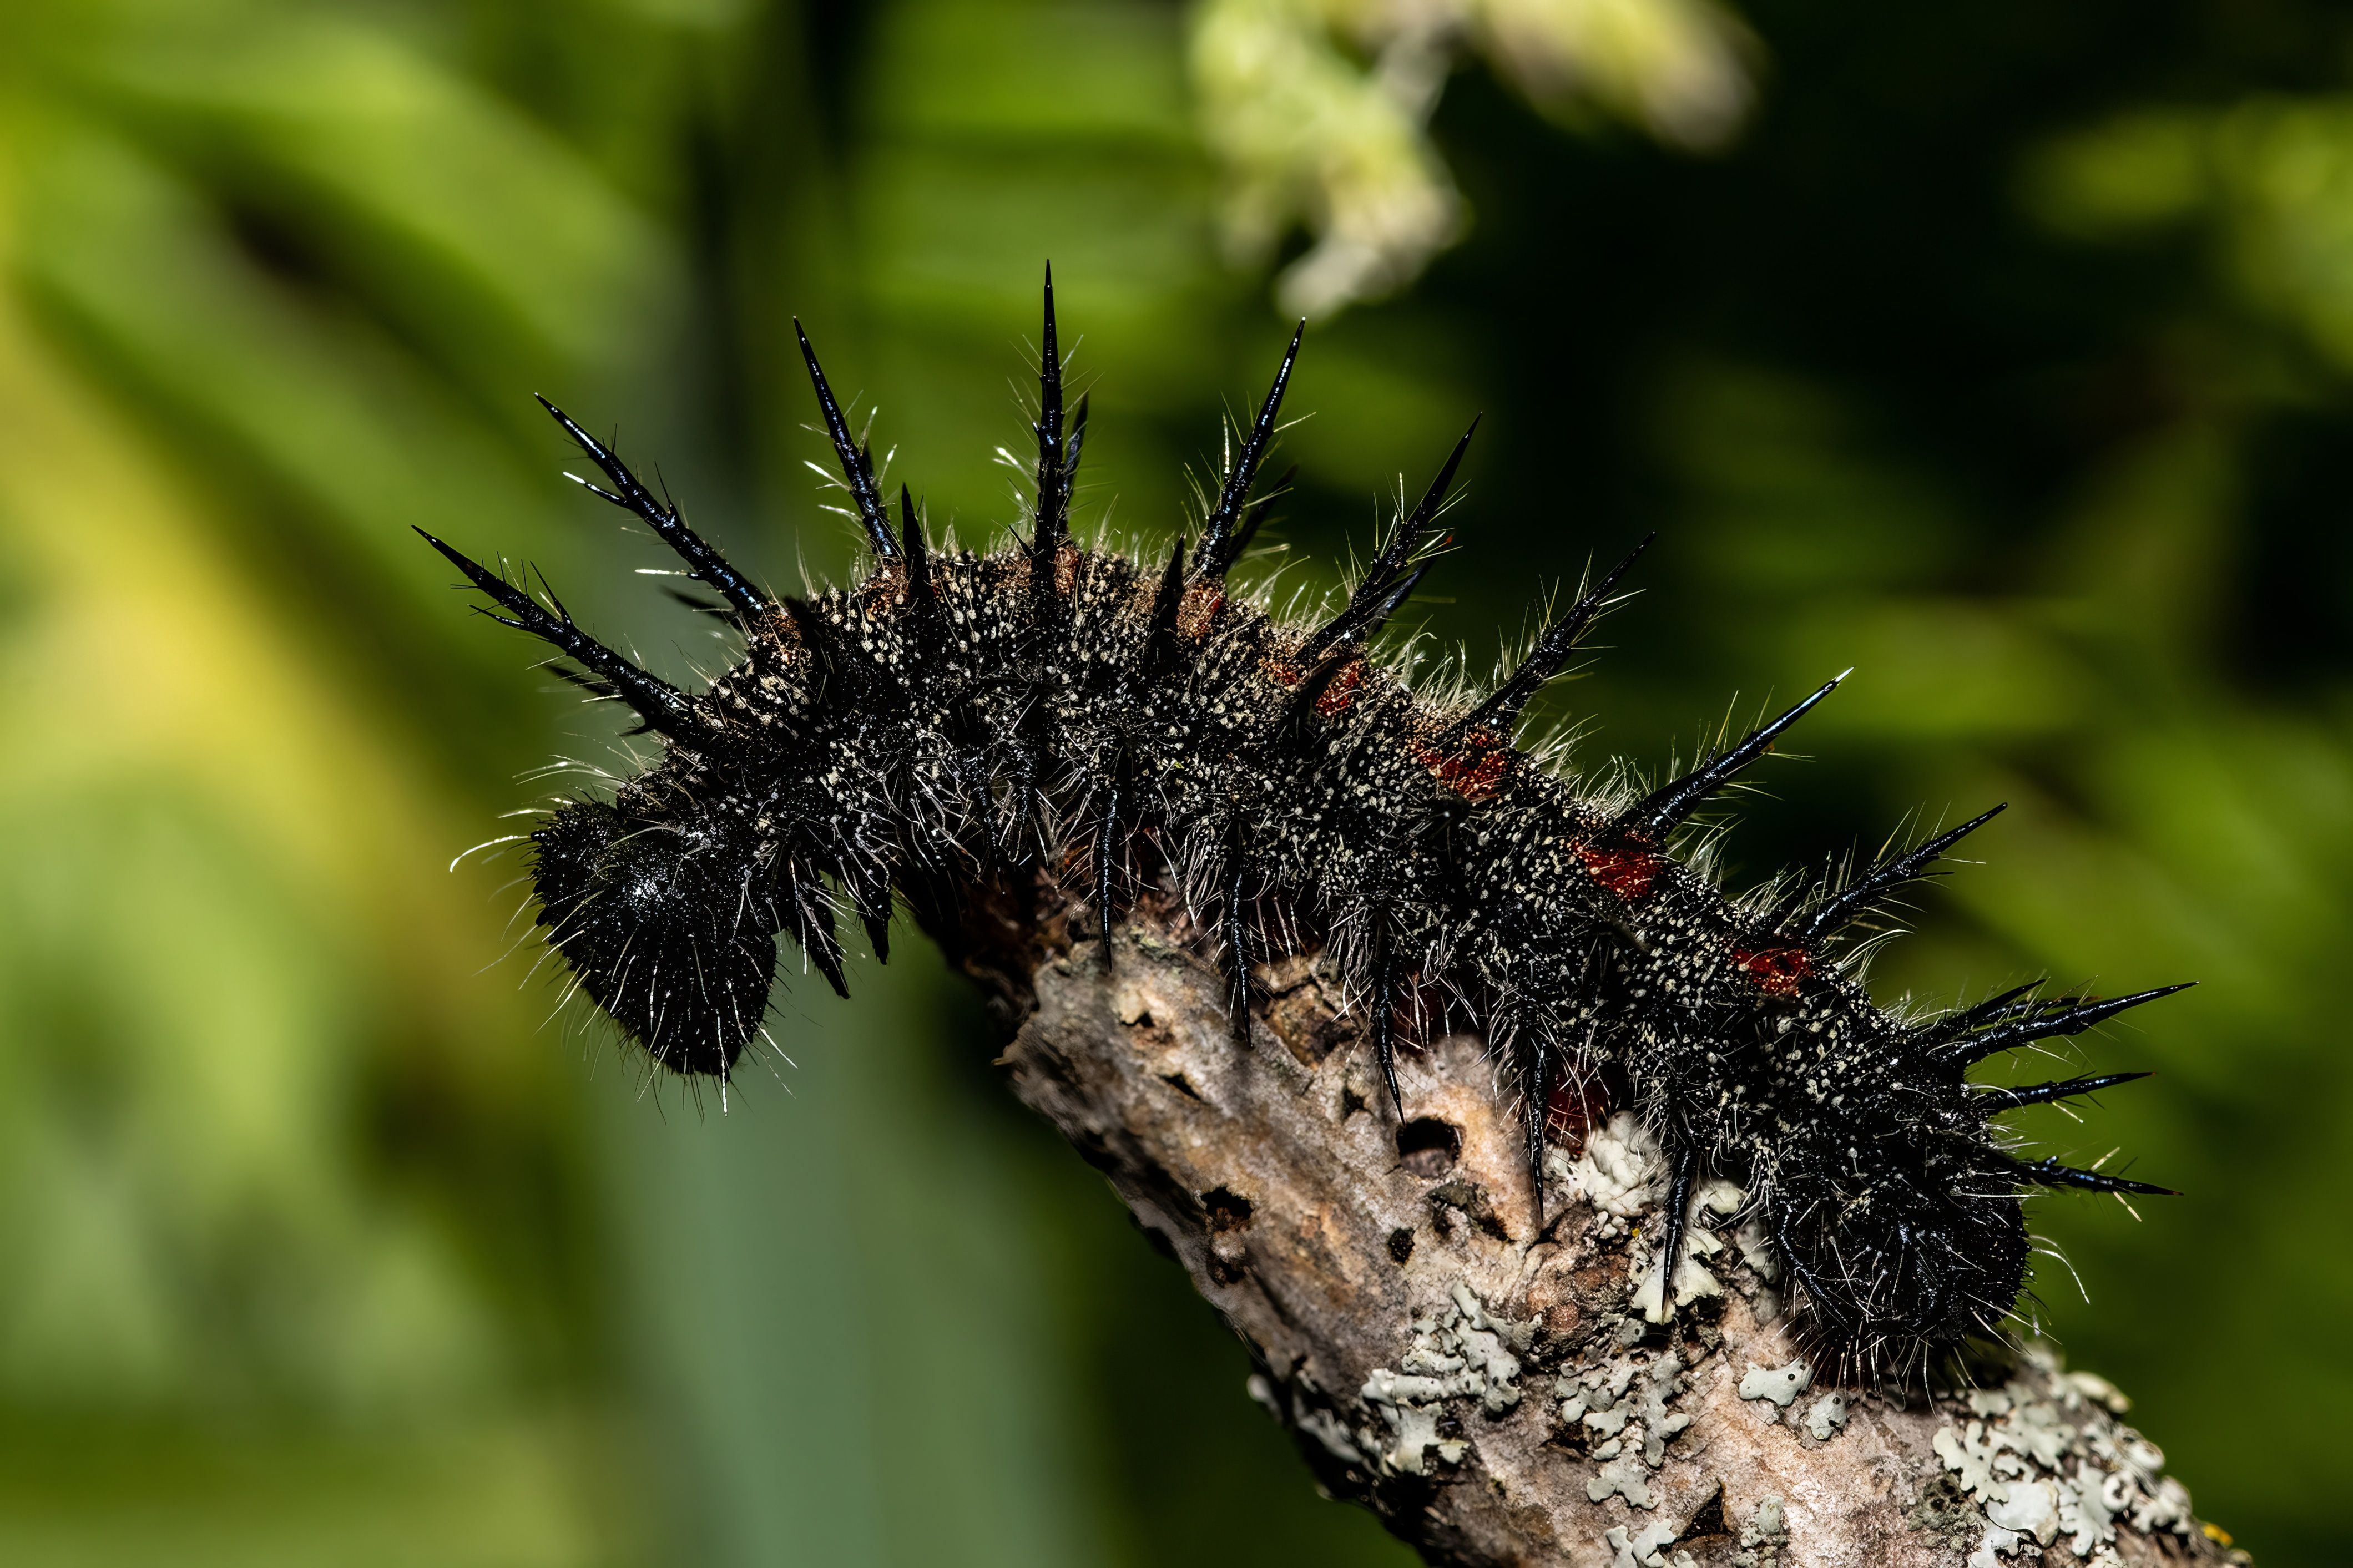 lepidoptera, caterpillar, insect, insectphoto, insectmacro, insectlovers, macrophoto, macrophotography, nature, enthomology, Stephane